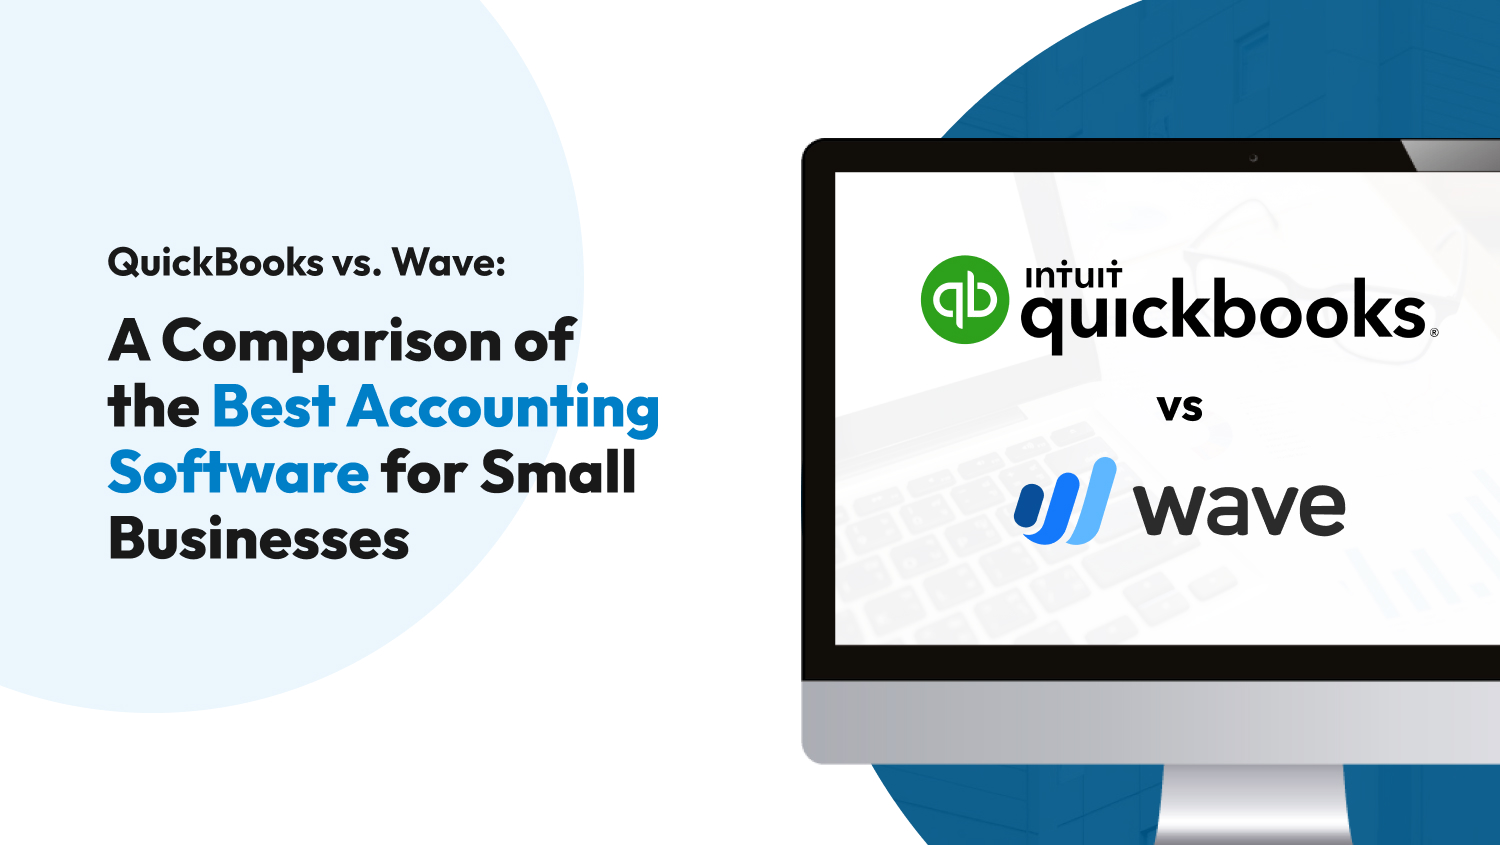 QuickBooks vs. Wave: A Comparison of the Best Accounting Software for Small Businesses